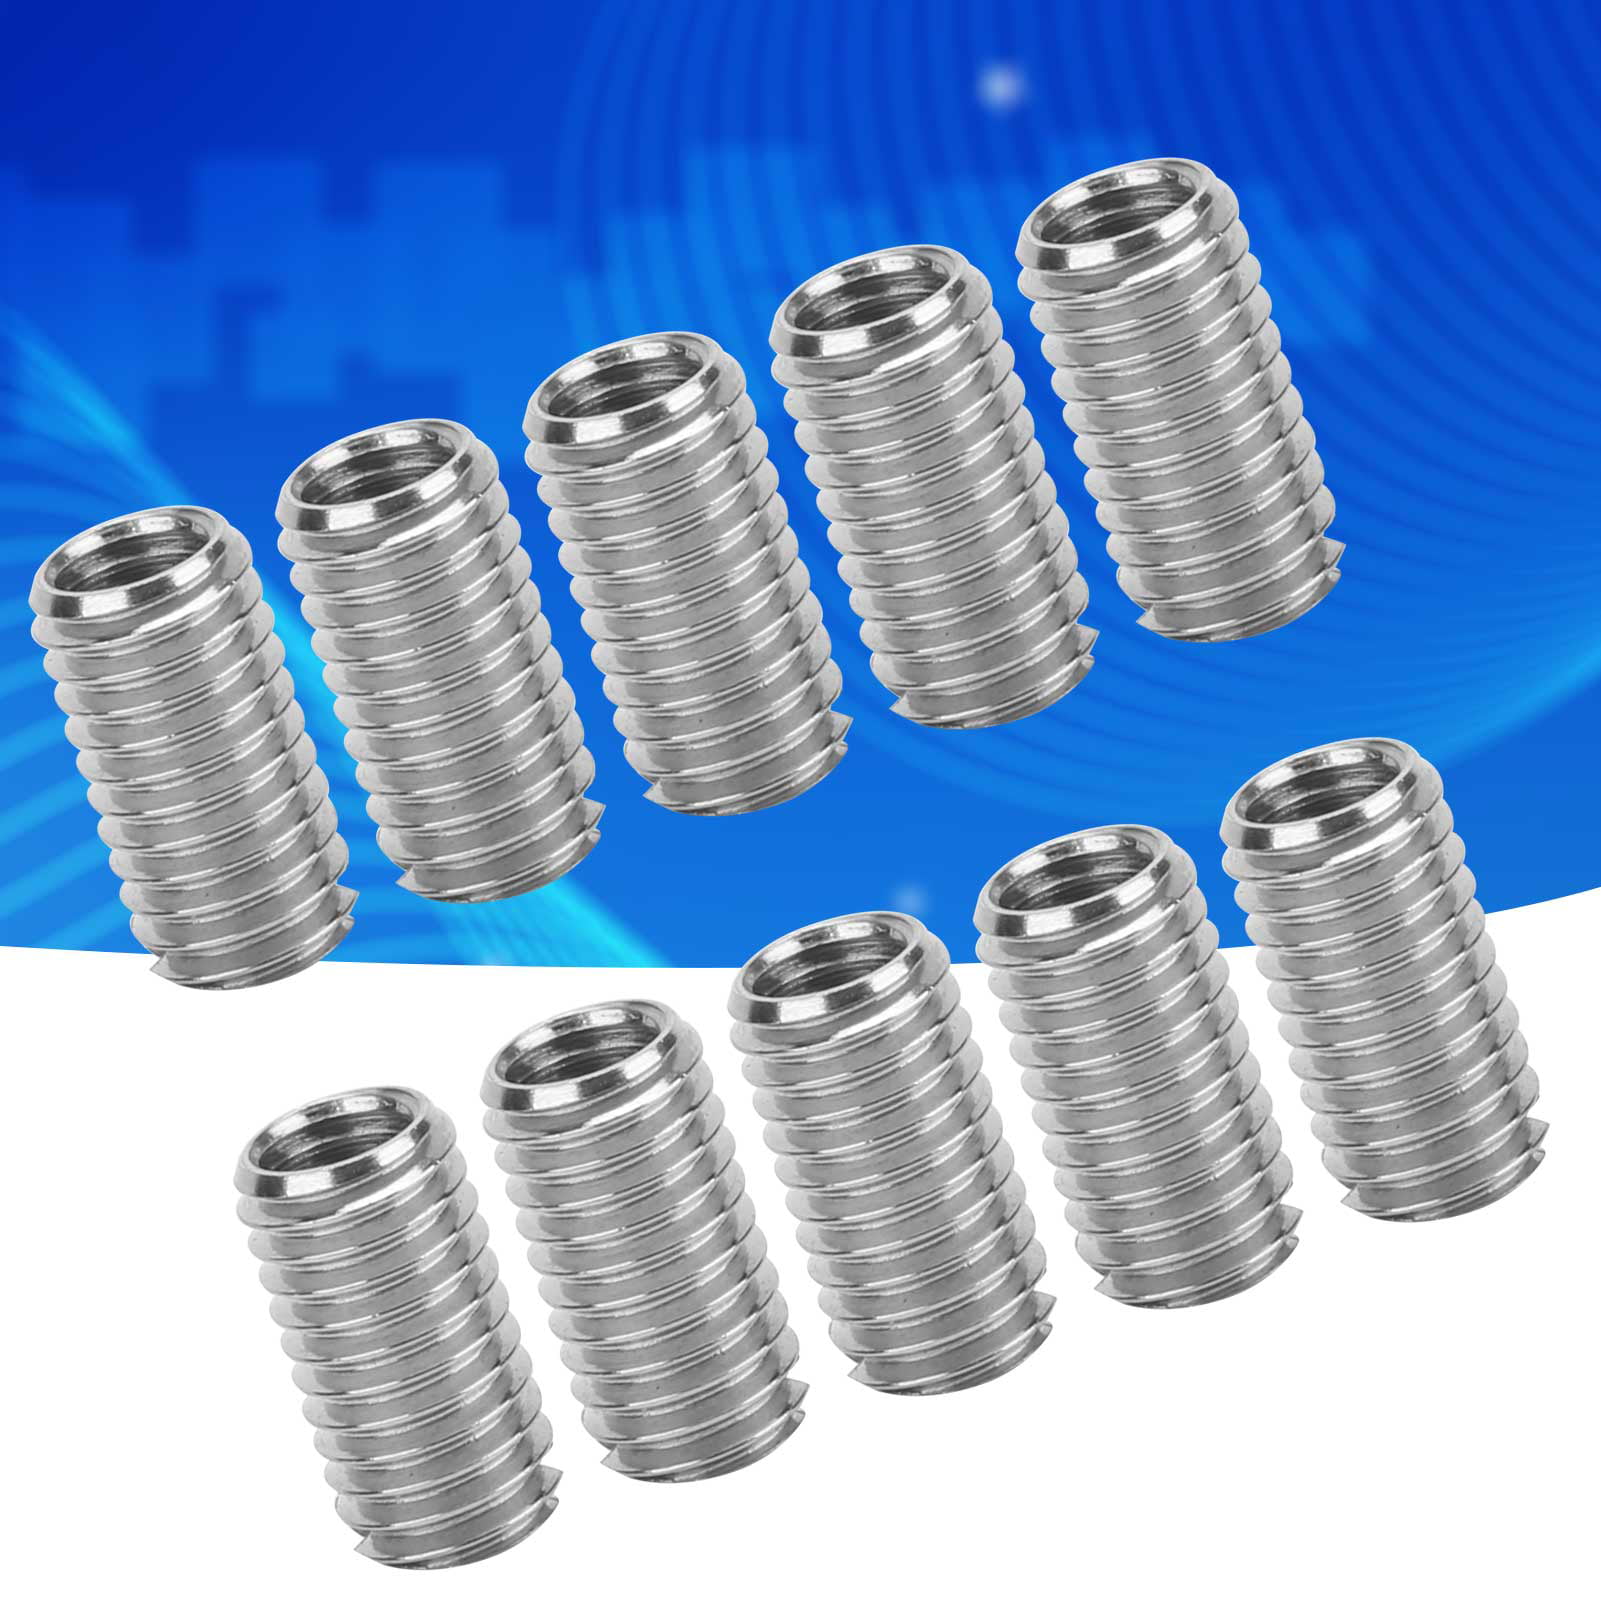 Details about   New Thread Inserts Male Female Reducing Nut Repair Tool Stainless Steel Fastener 